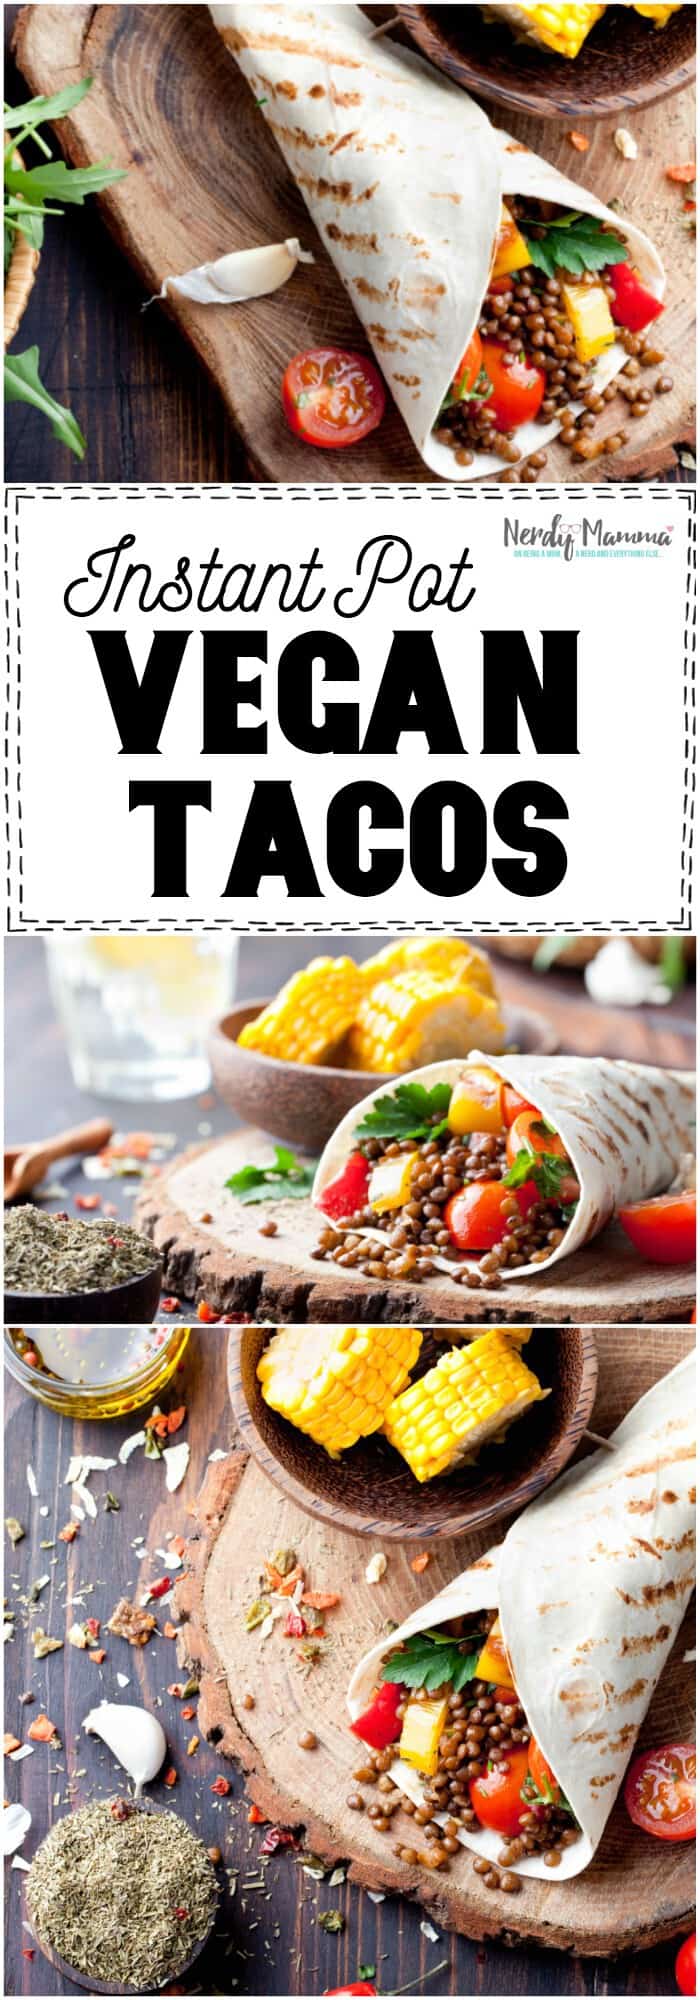 OH. My. Wow. Vegan Tacos in the Instant Pot. I never thought to make this before! #vegan #instantpot #instantpotvegan #taco #mexican #veganmexican #texmex #vegantexmex #recipe #yum #tasty